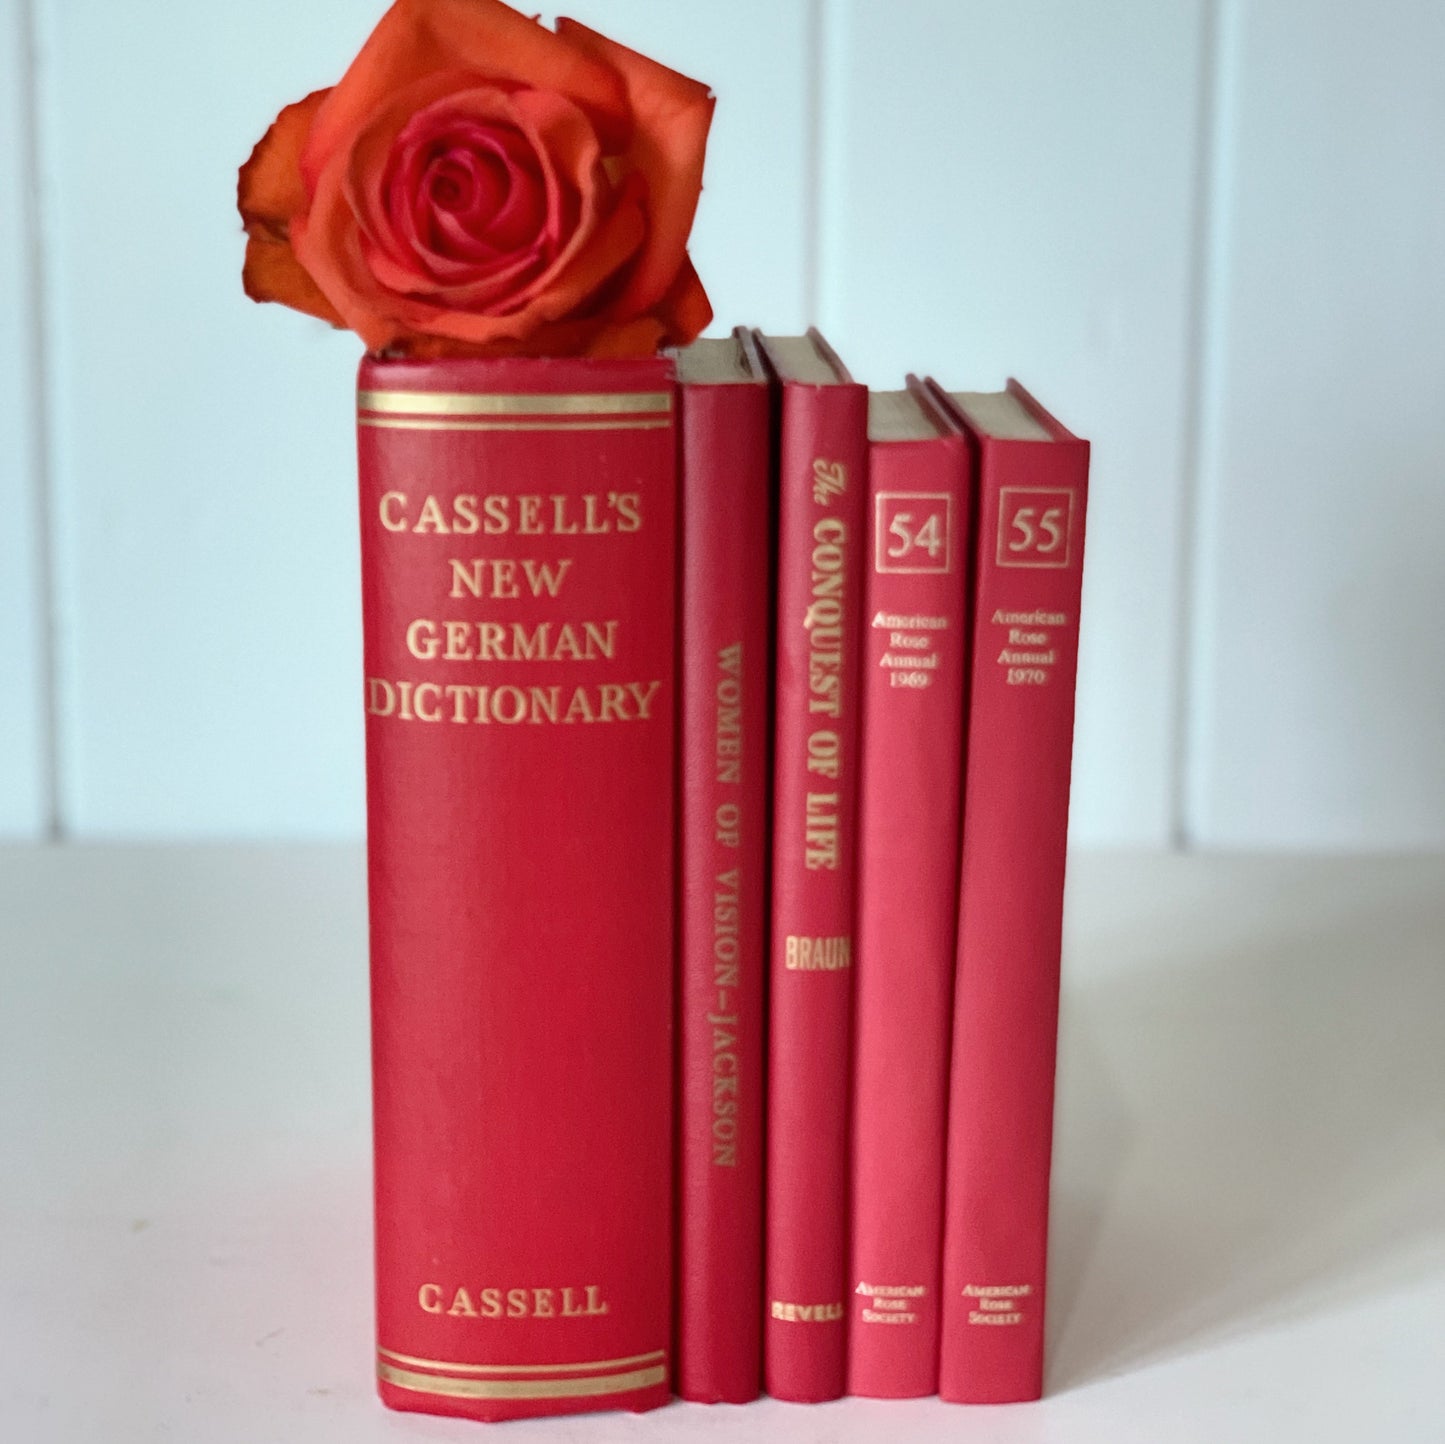 Vintage Red and Gold Book Bundle for Decor, Bright Ornate Books for Shelf Styling